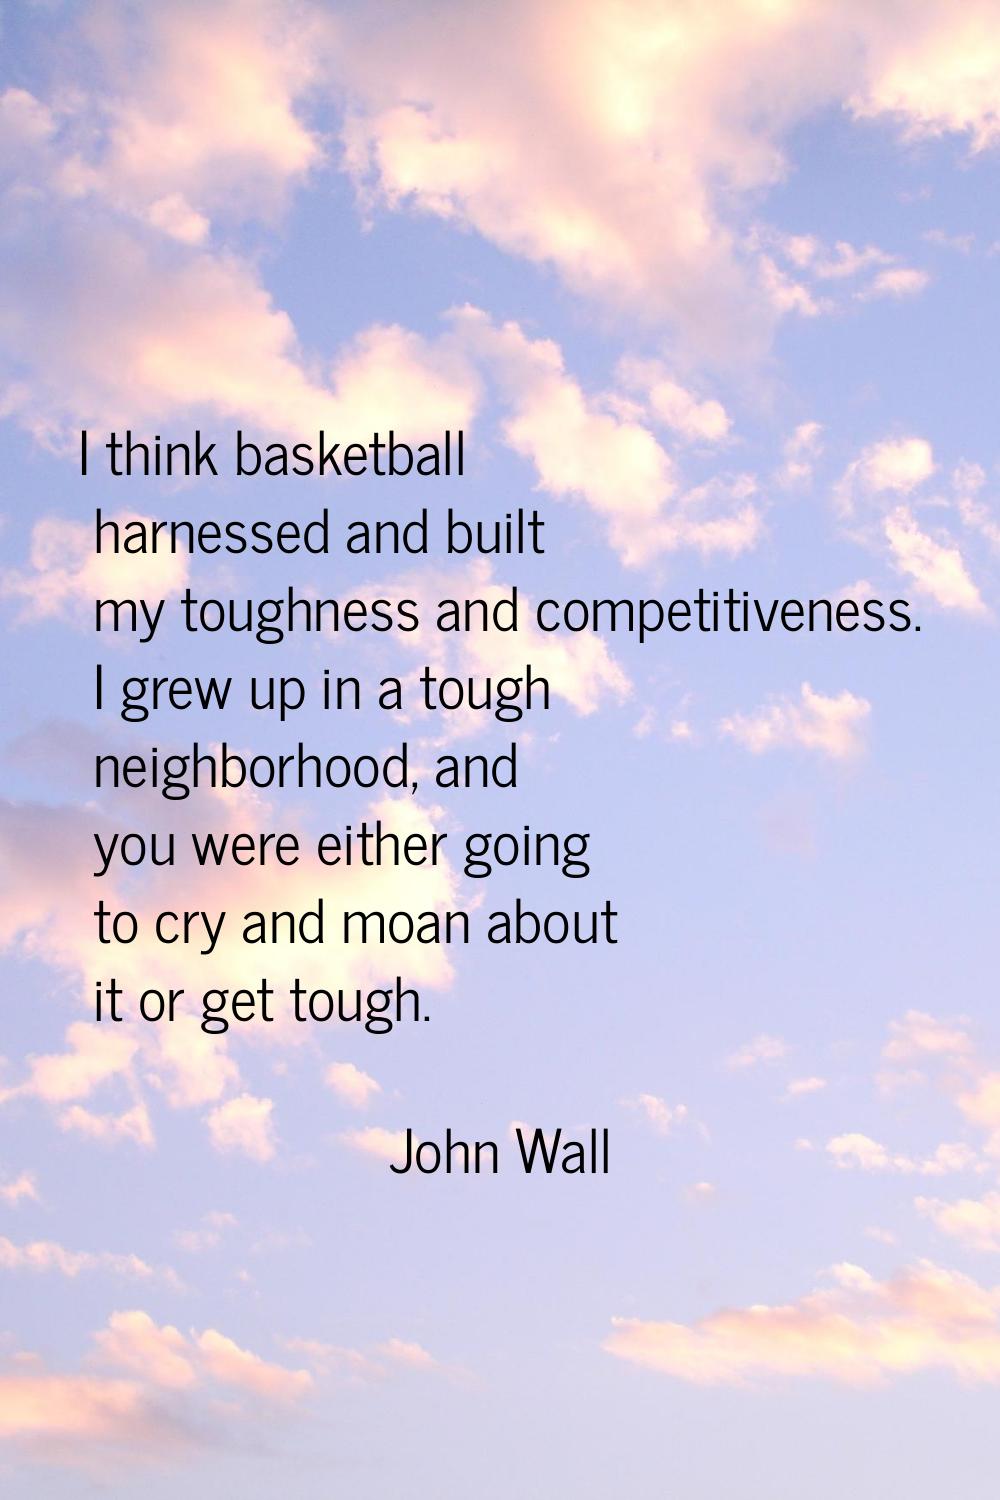 I think basketball harnessed and built my toughness and competitiveness. I grew up in a tough neigh